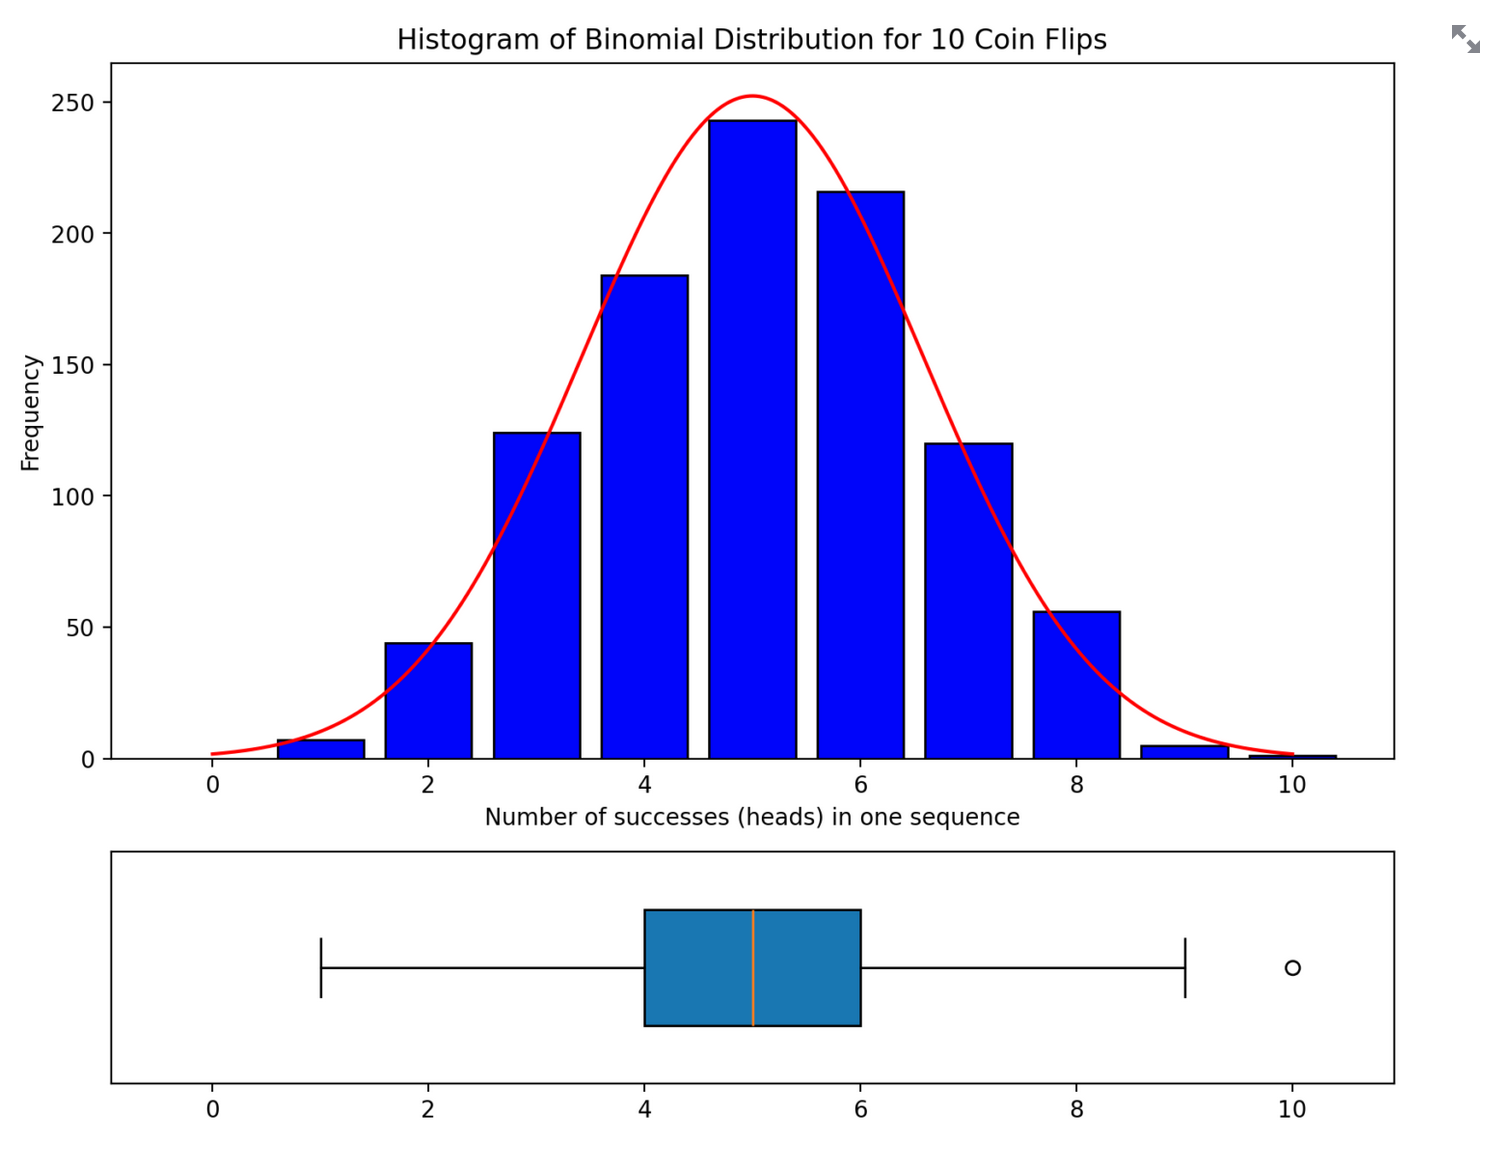 Graphing a Binomial Distribution